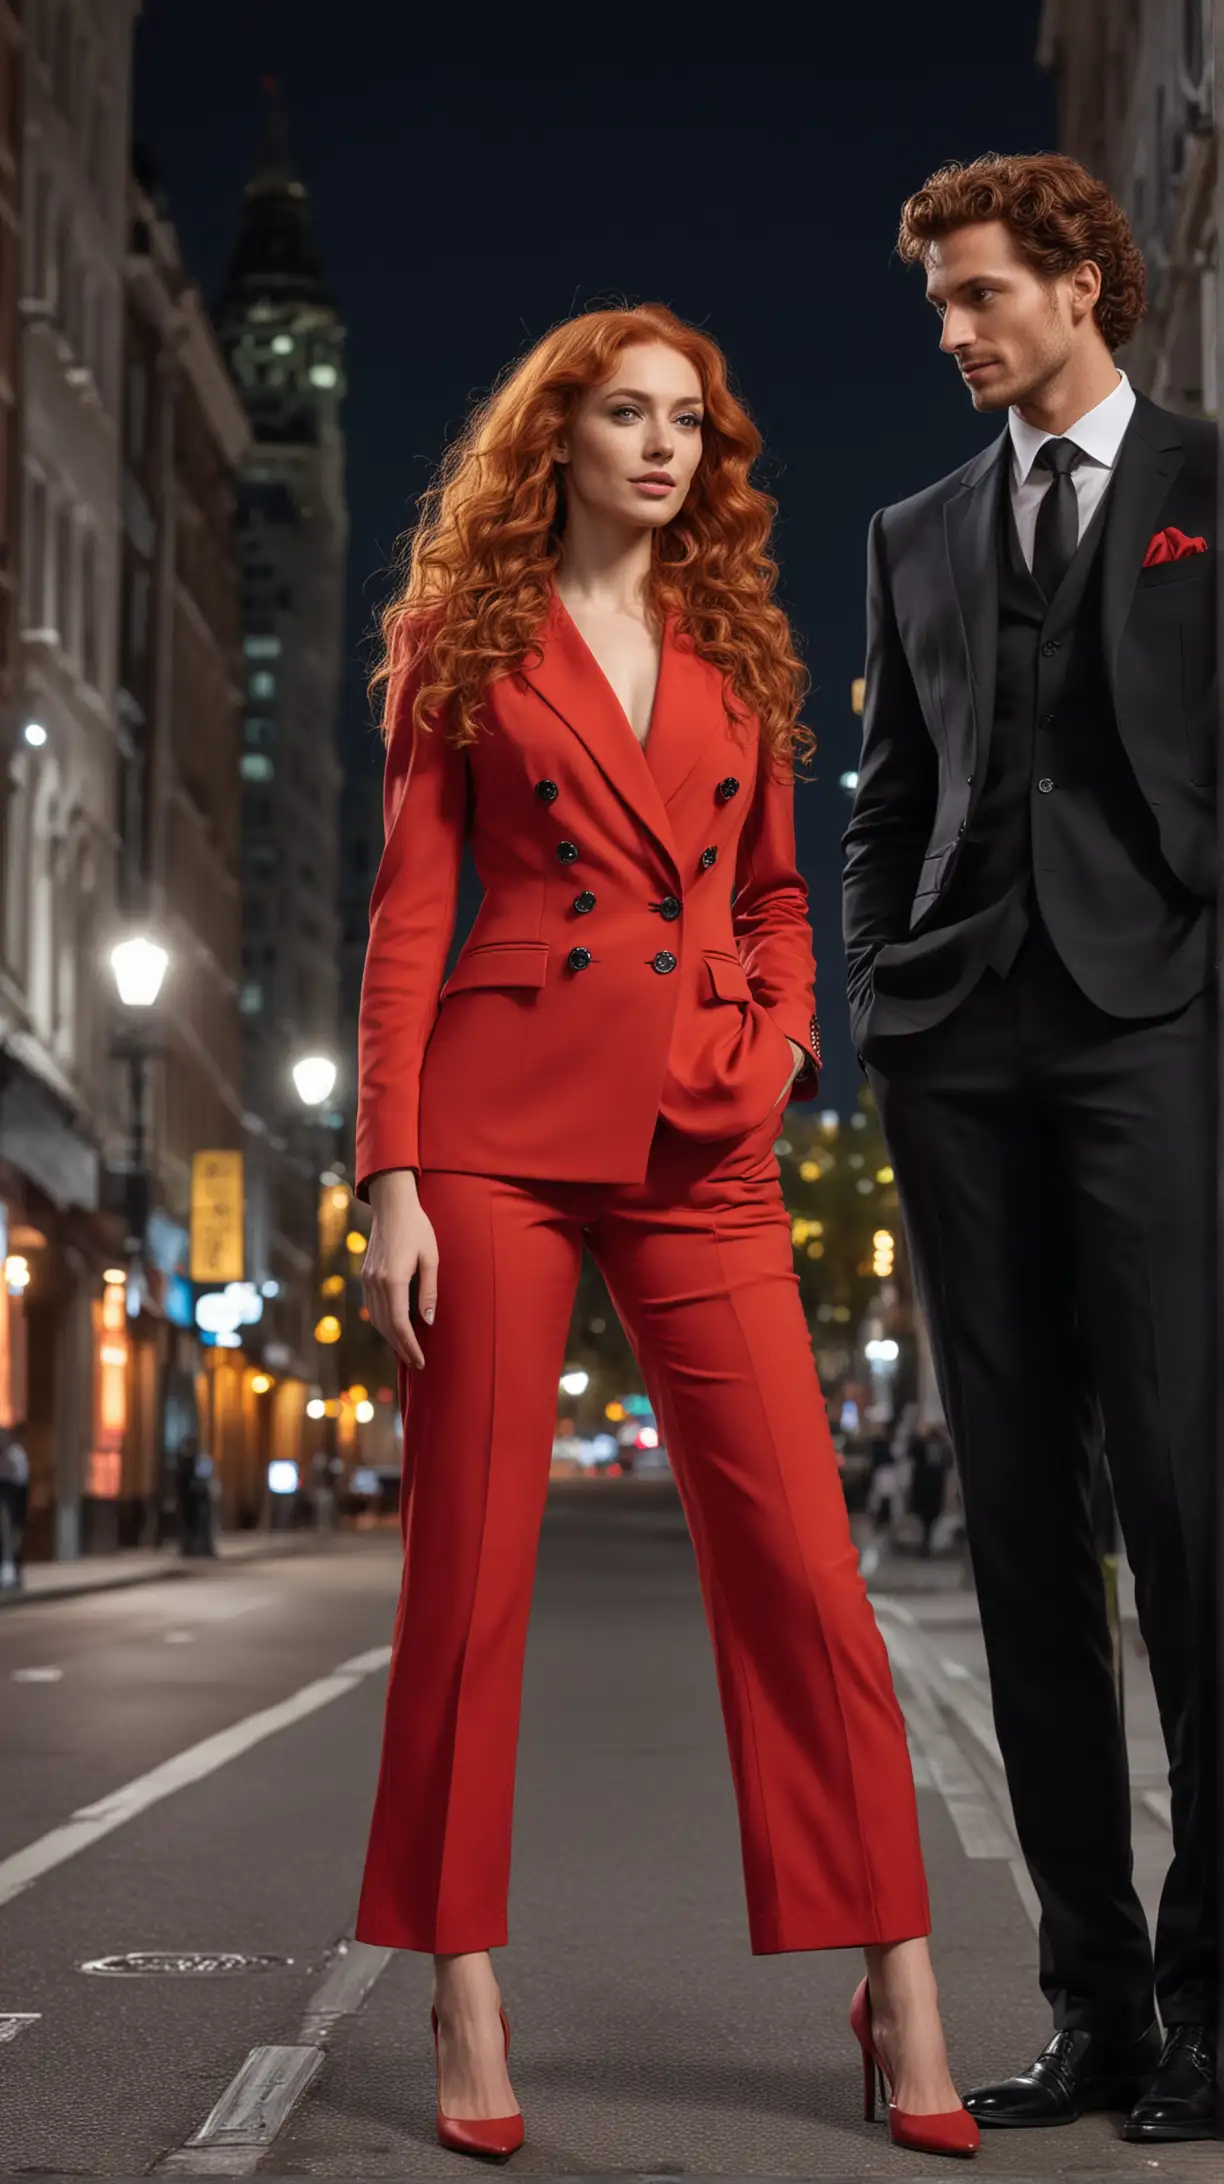 Stylish Red Pantsuit Woman and Black Suit Man in Night Cityscape